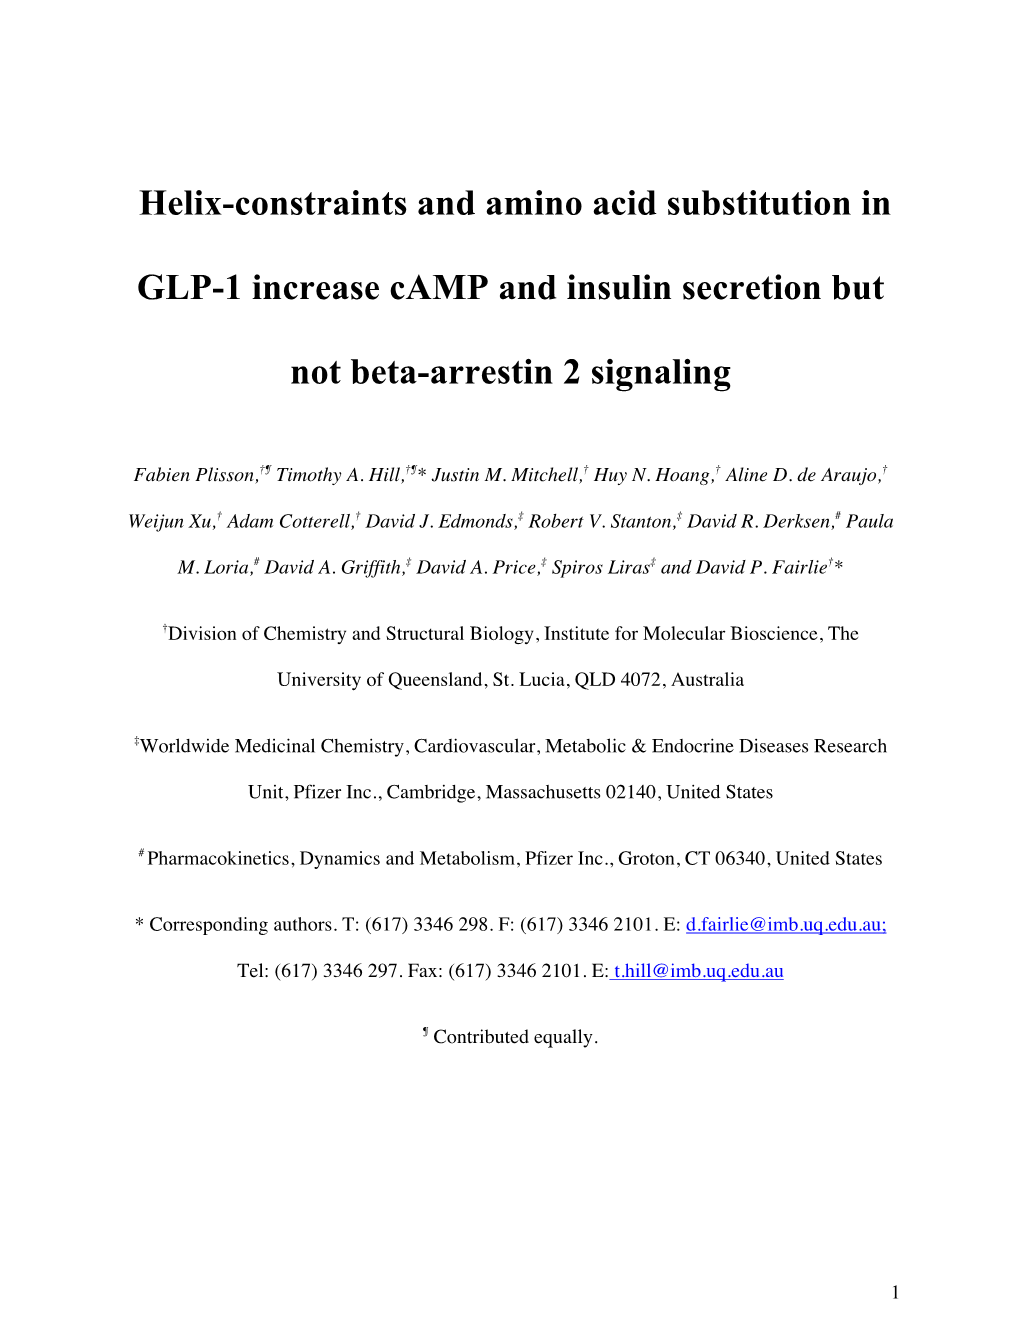 Helix-Constraints and Amino Acid Substitution in GLP-1 Increase